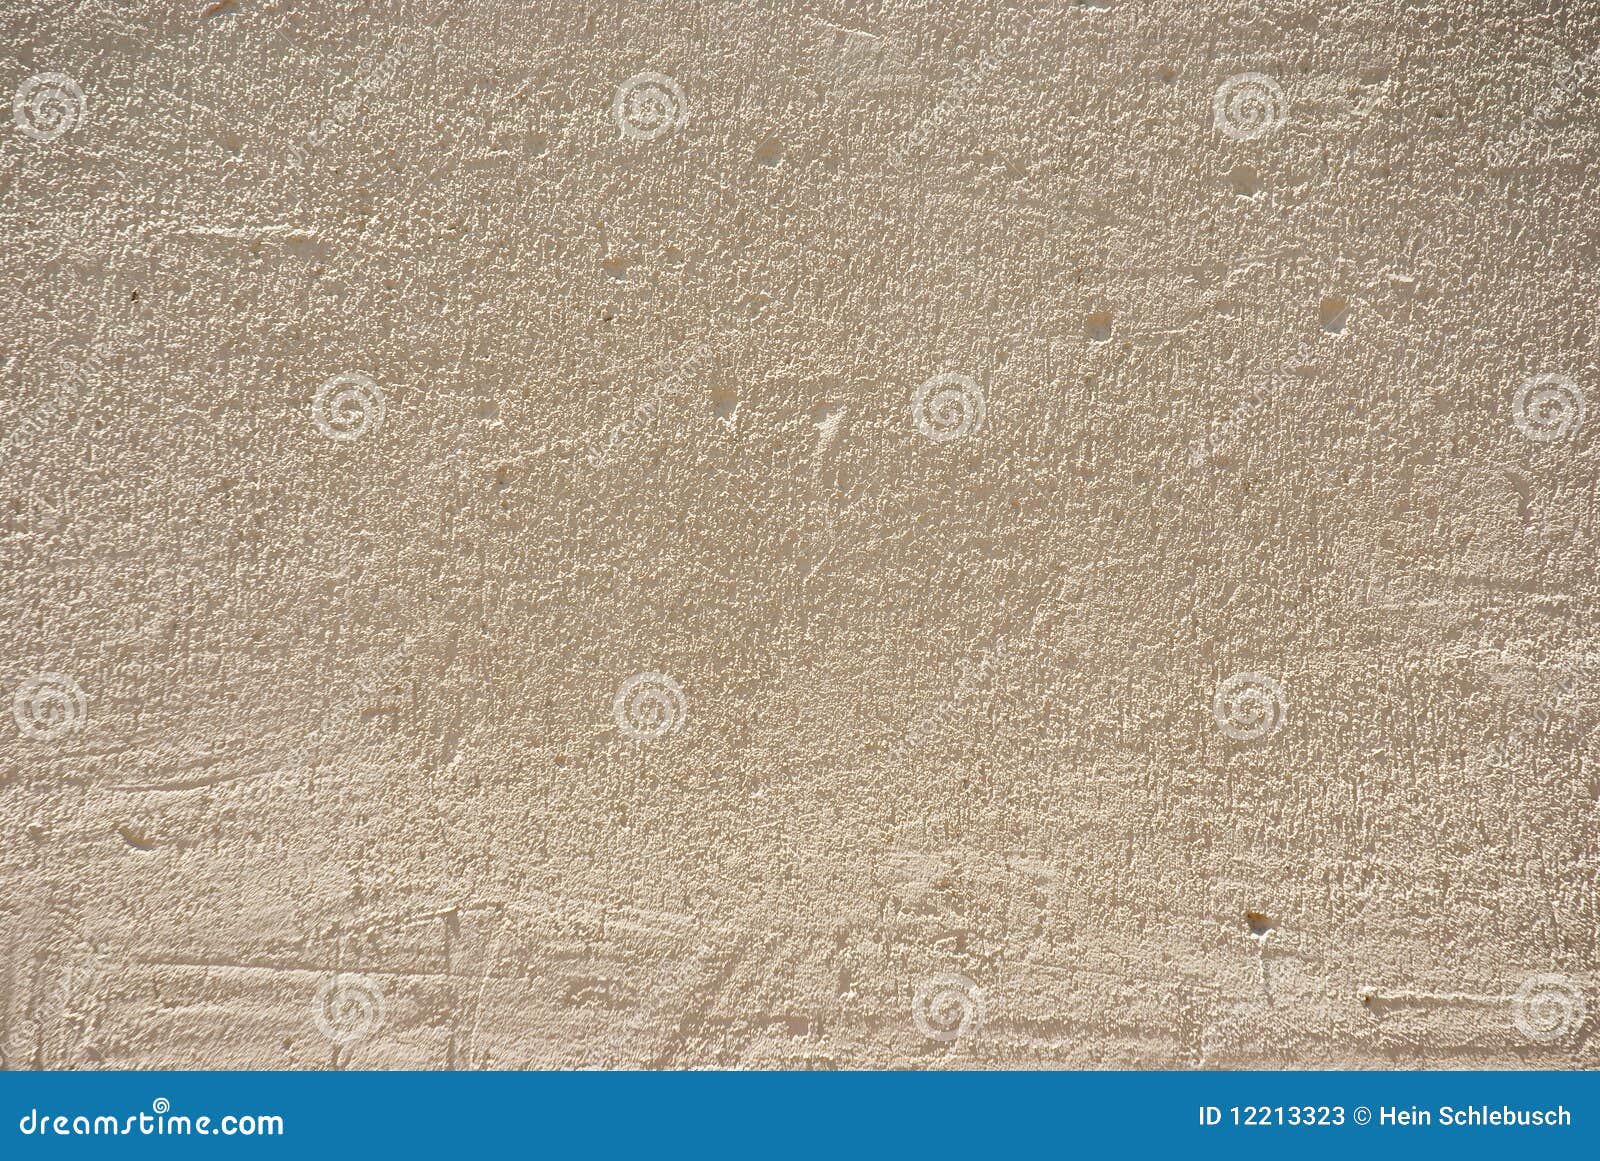 Surface of painted wall stock image. Image of architecture - 12213323